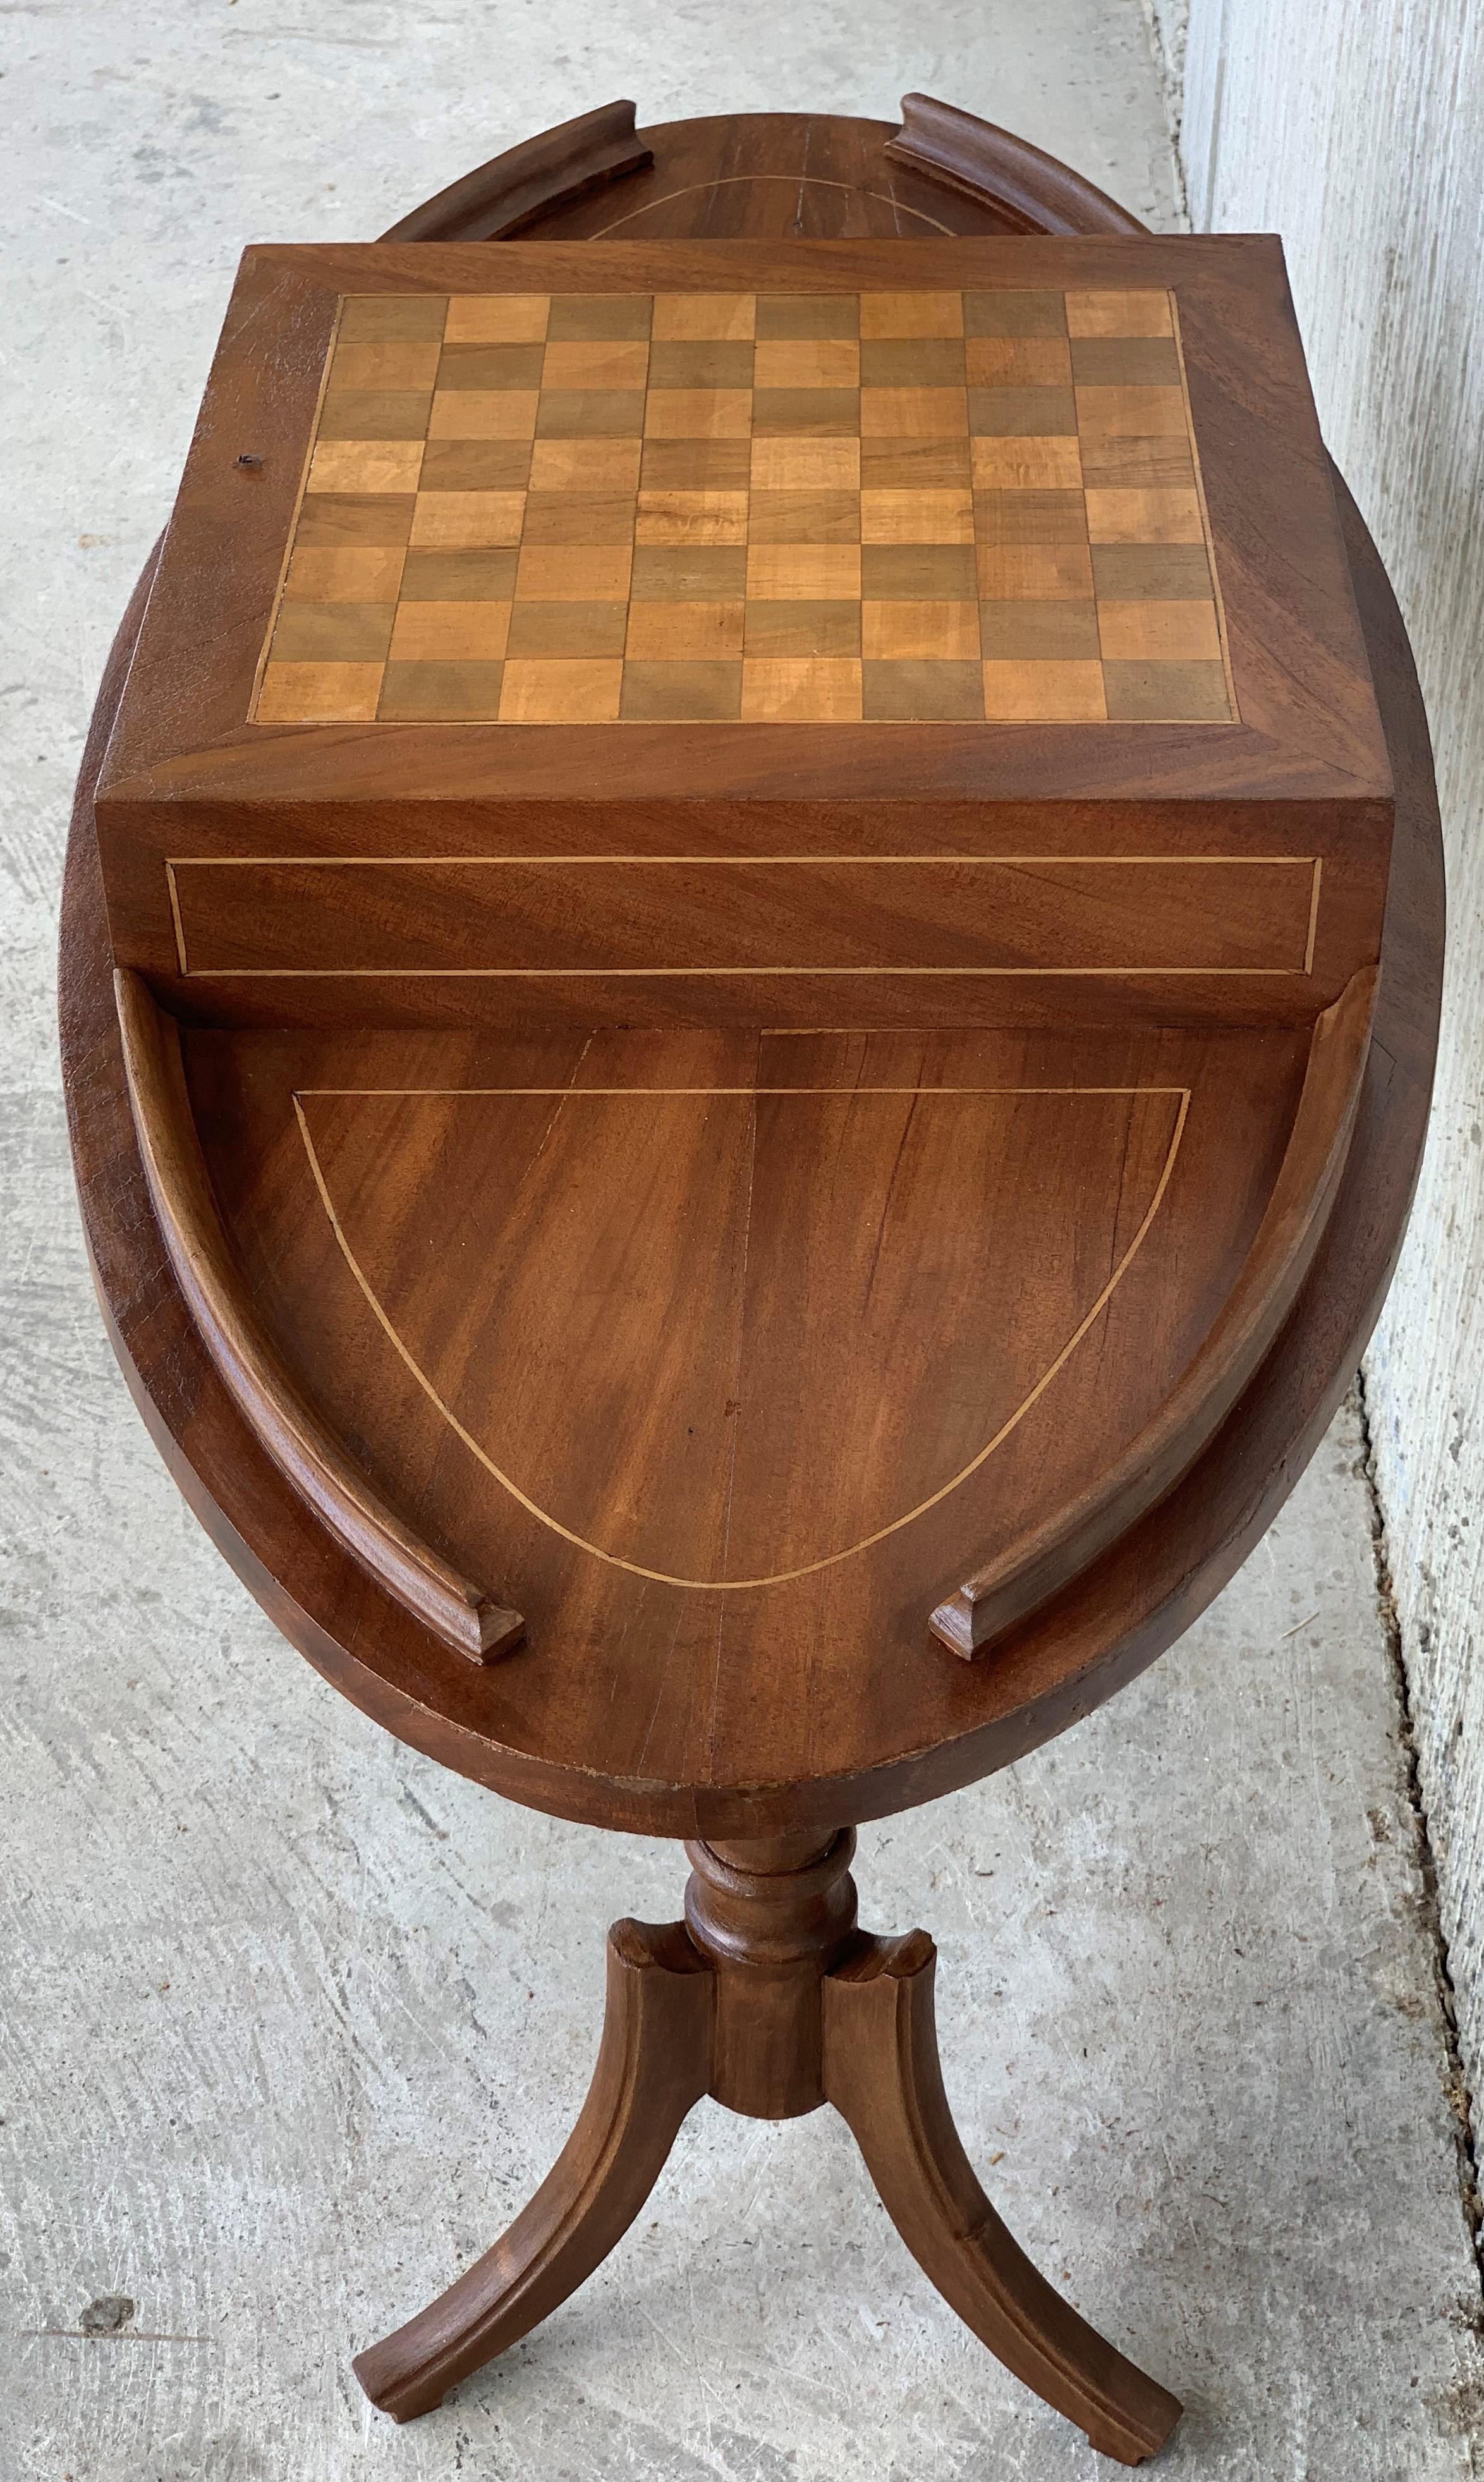 Regency Revival 20th Century Regency Style Oval Walnut Chess Game Table with Two Drawers For Sale